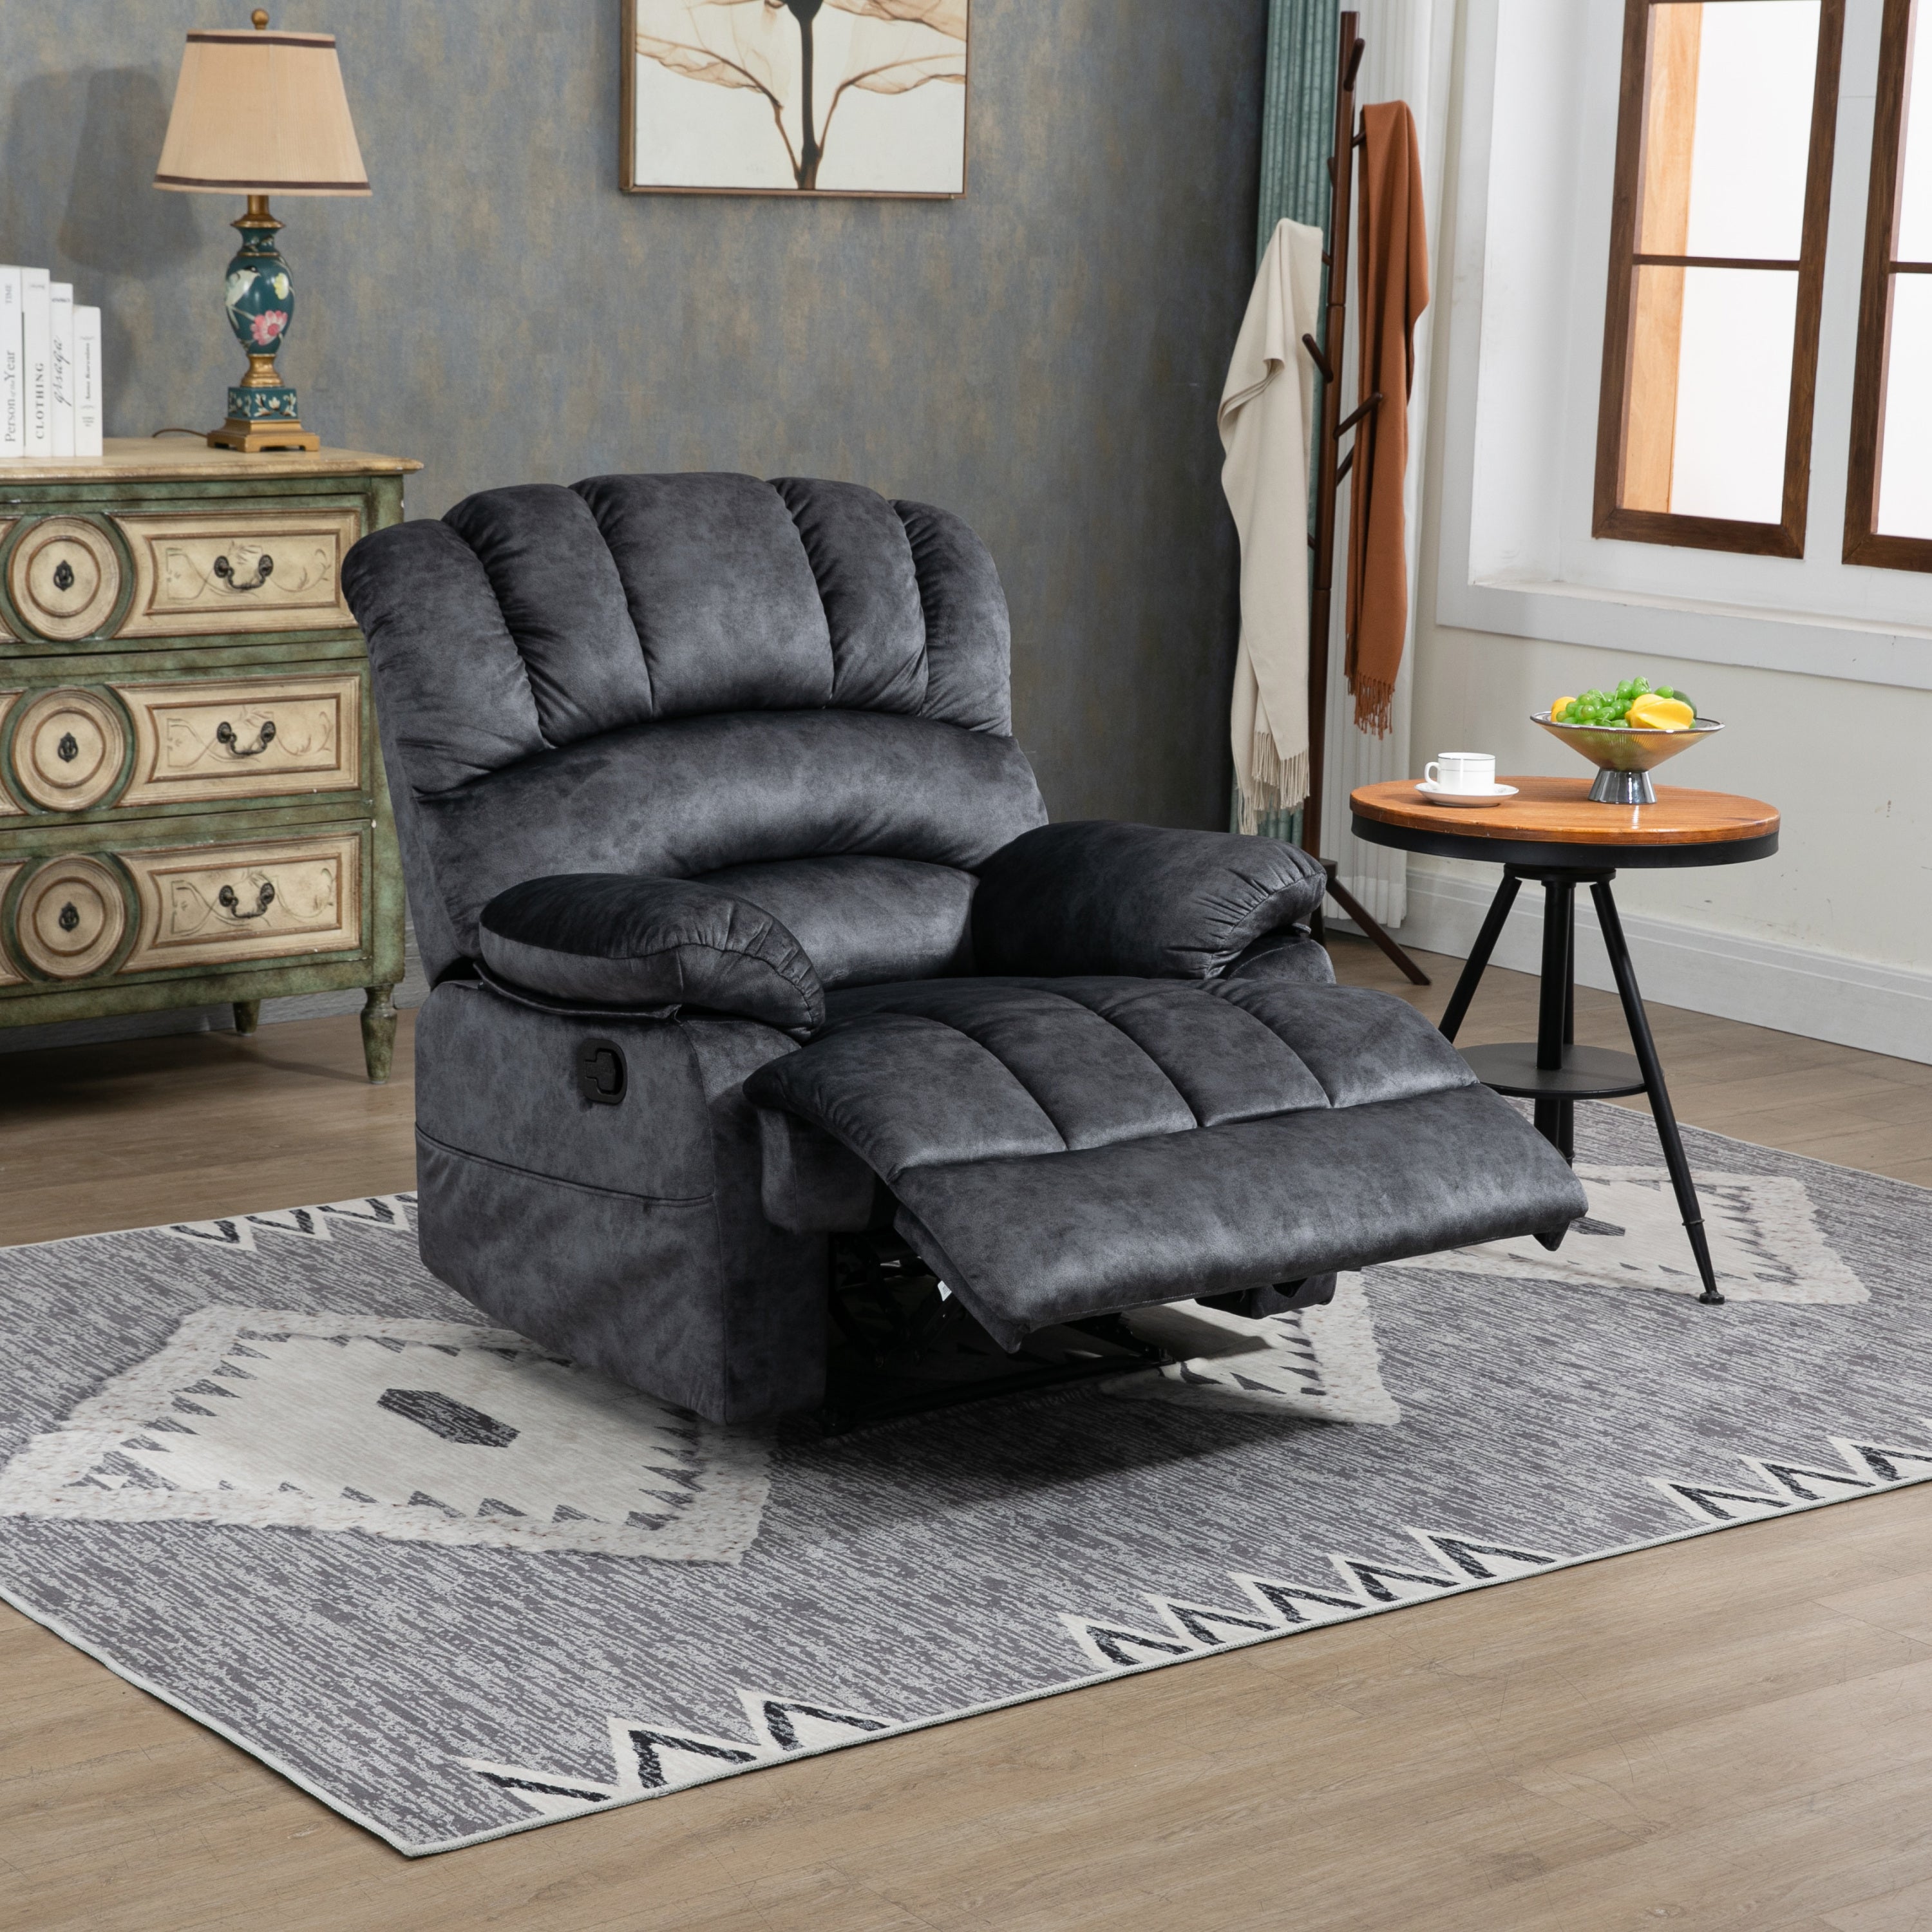 🆓🚛 Large Manual Recliner Chair In Fabric for Living Room, Gray